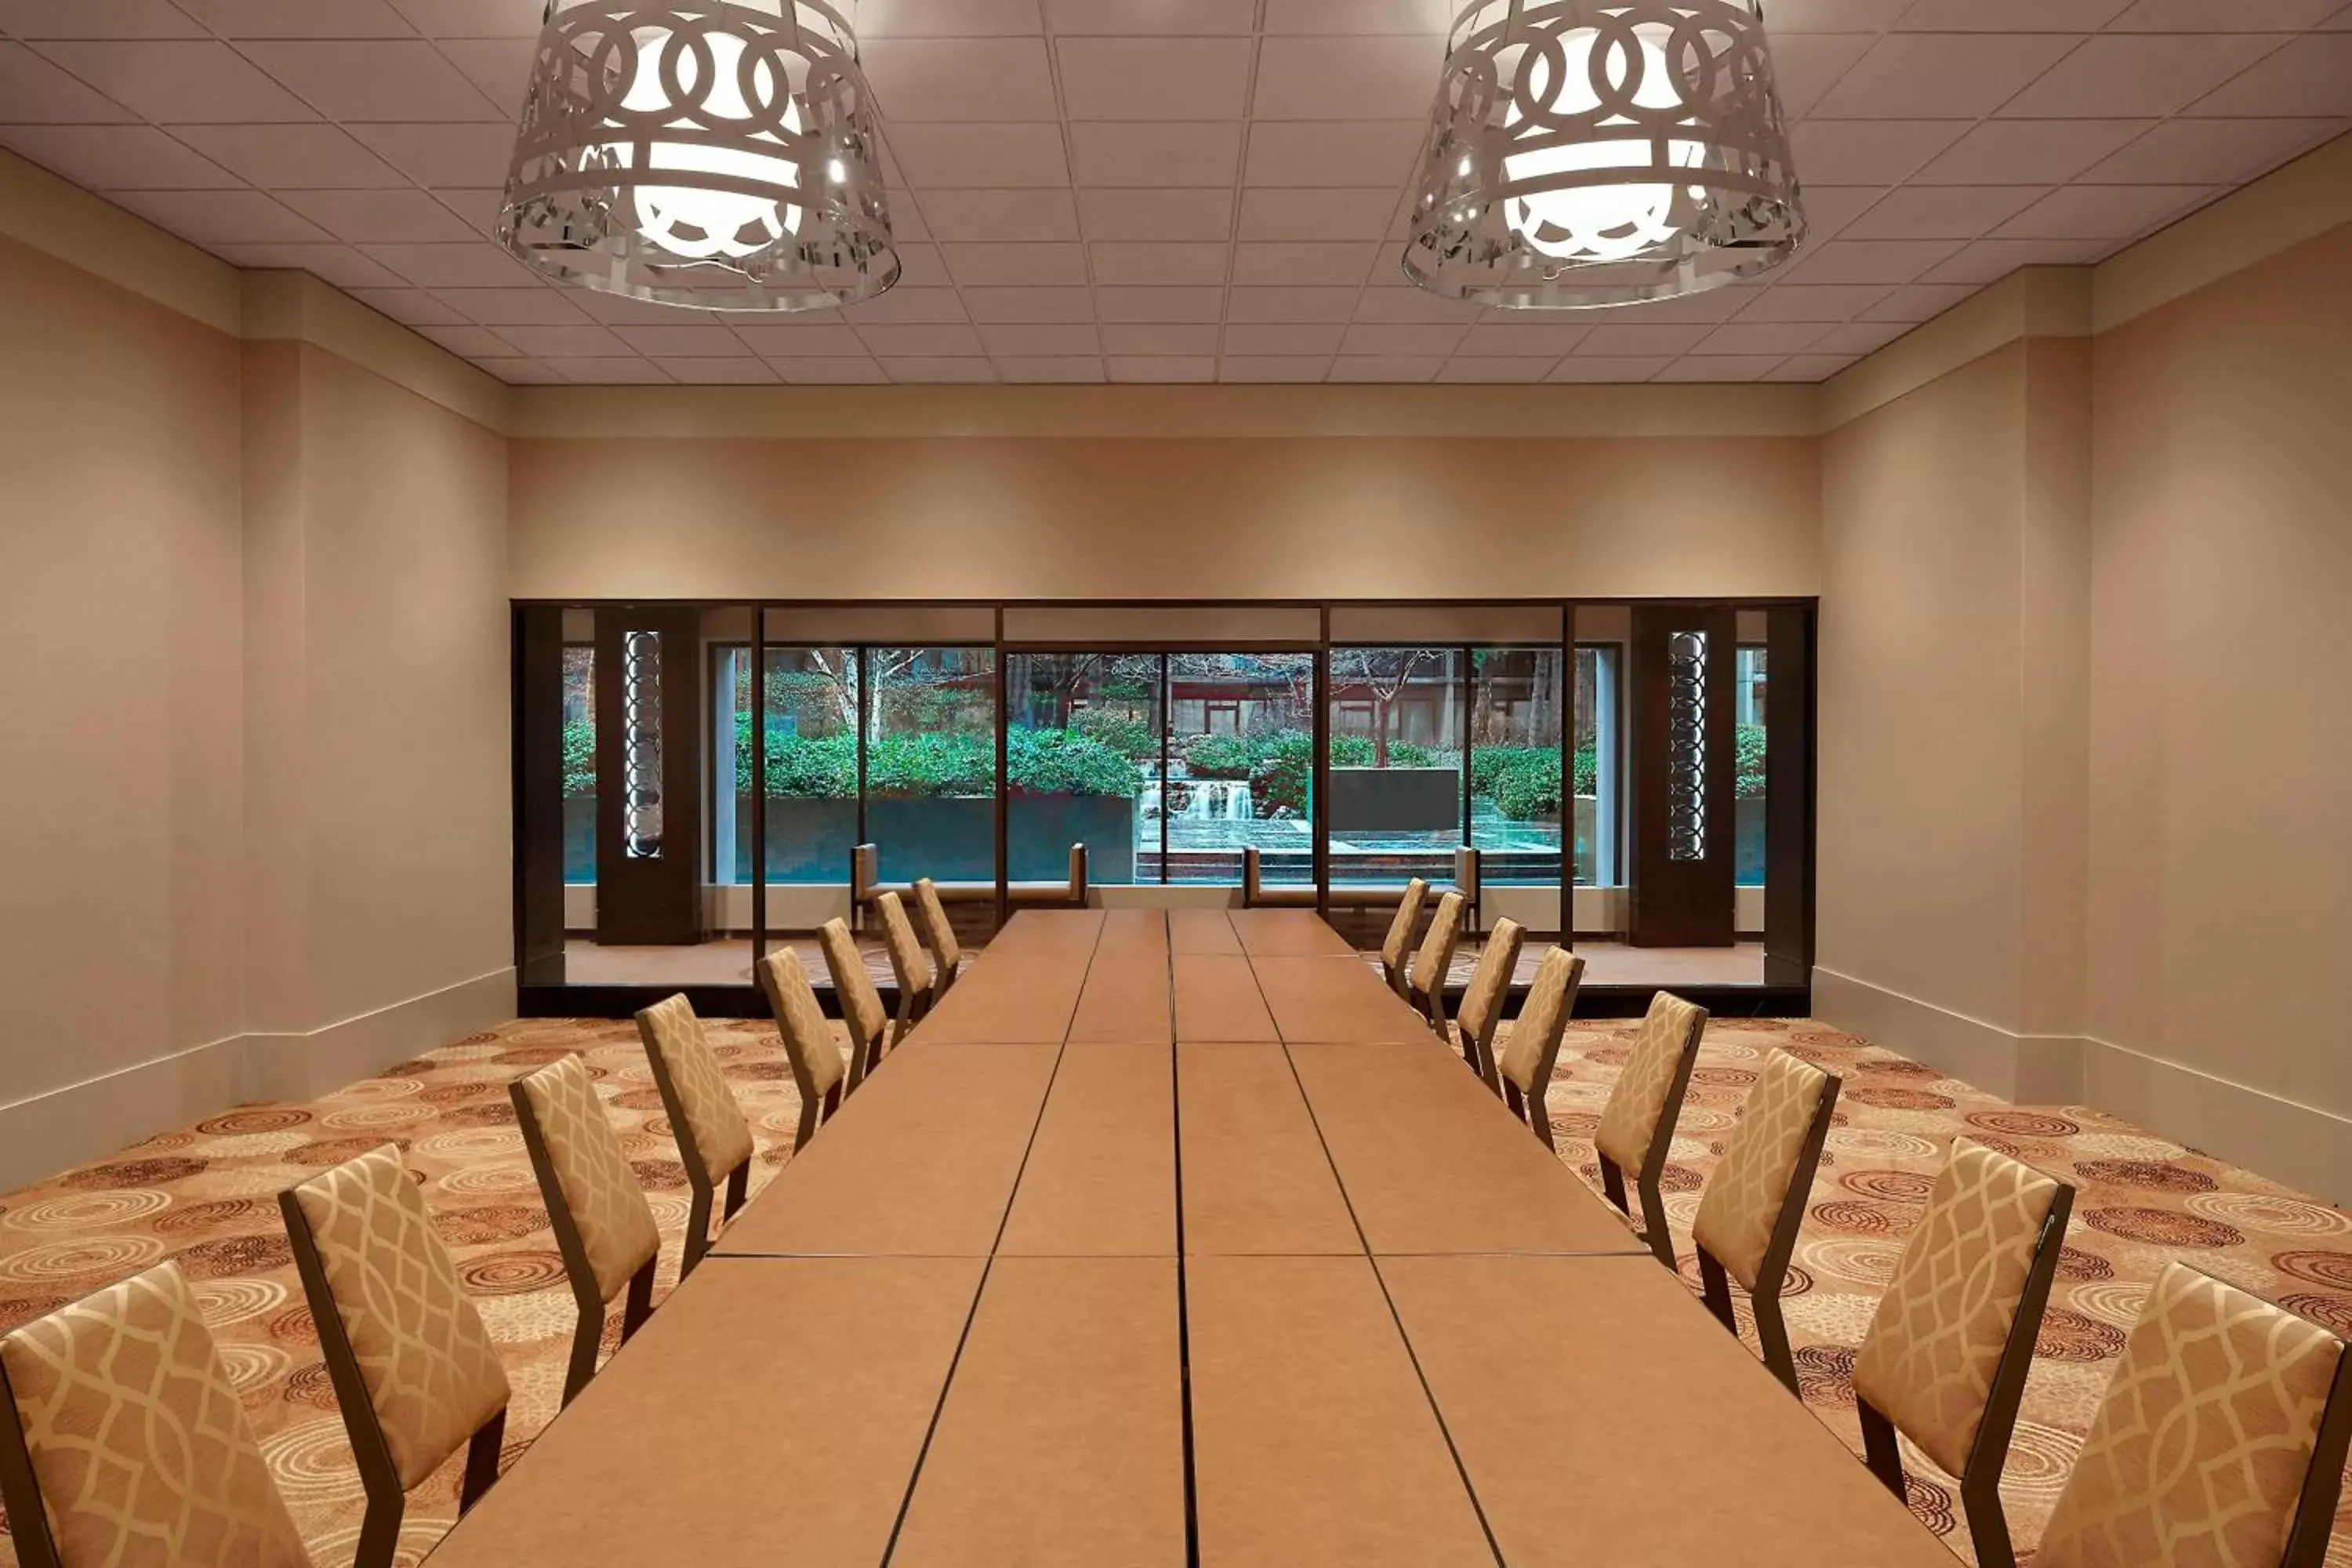 Meeting/conference room, Banquet Facilities in Sheraton Centre Toronto Hotel